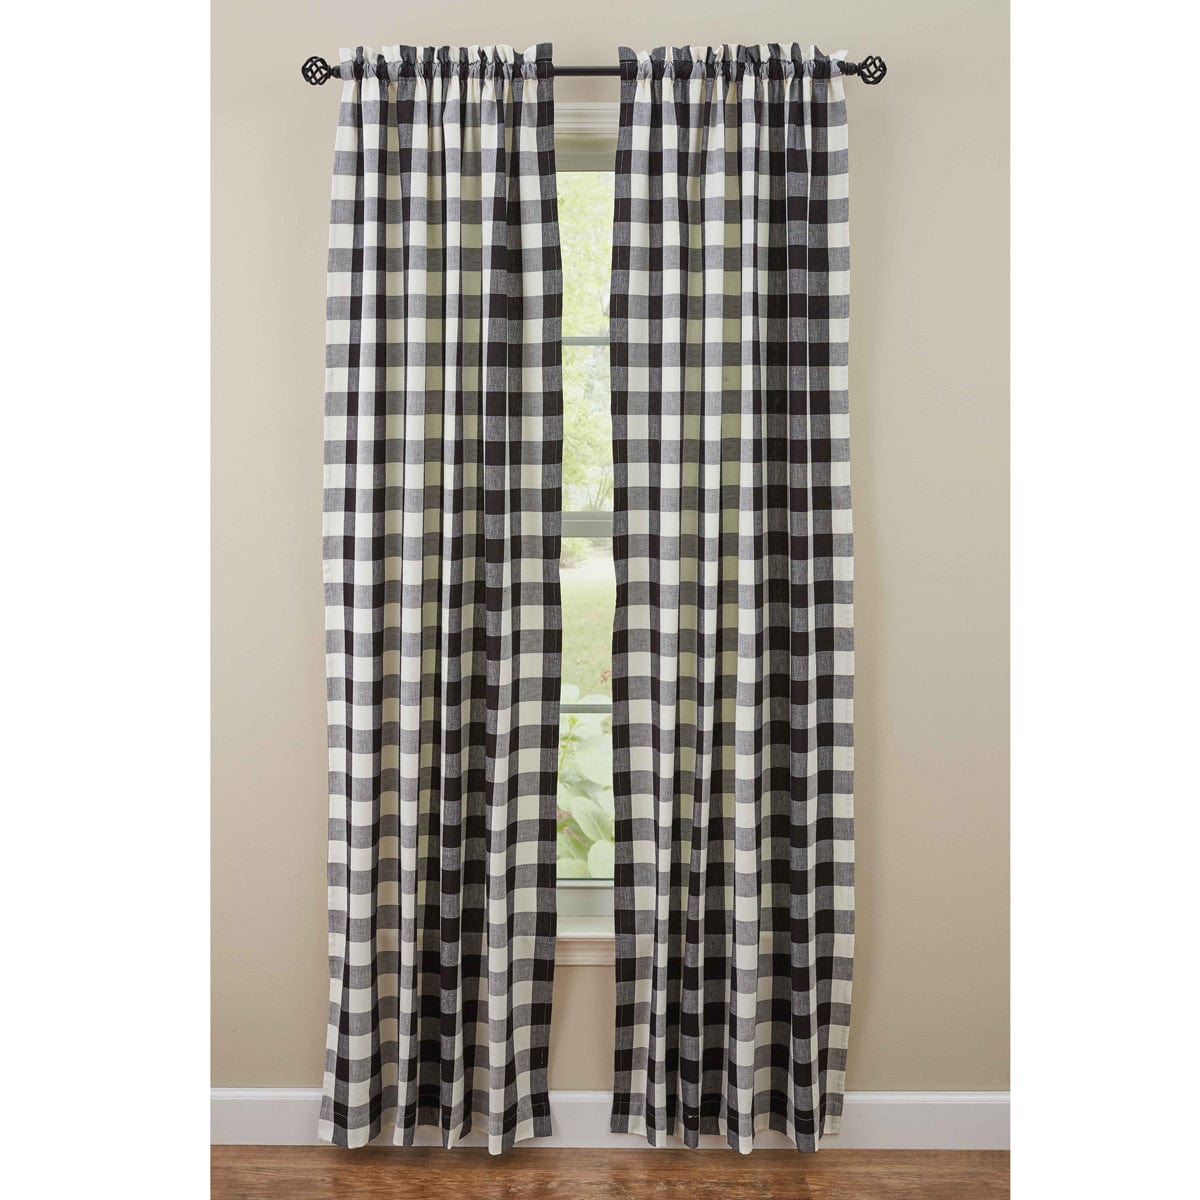 Wicklow Check in Black & Cream Panel Pair With Tie Backs 84" Long Lined-Park Designs-The Village Merchant